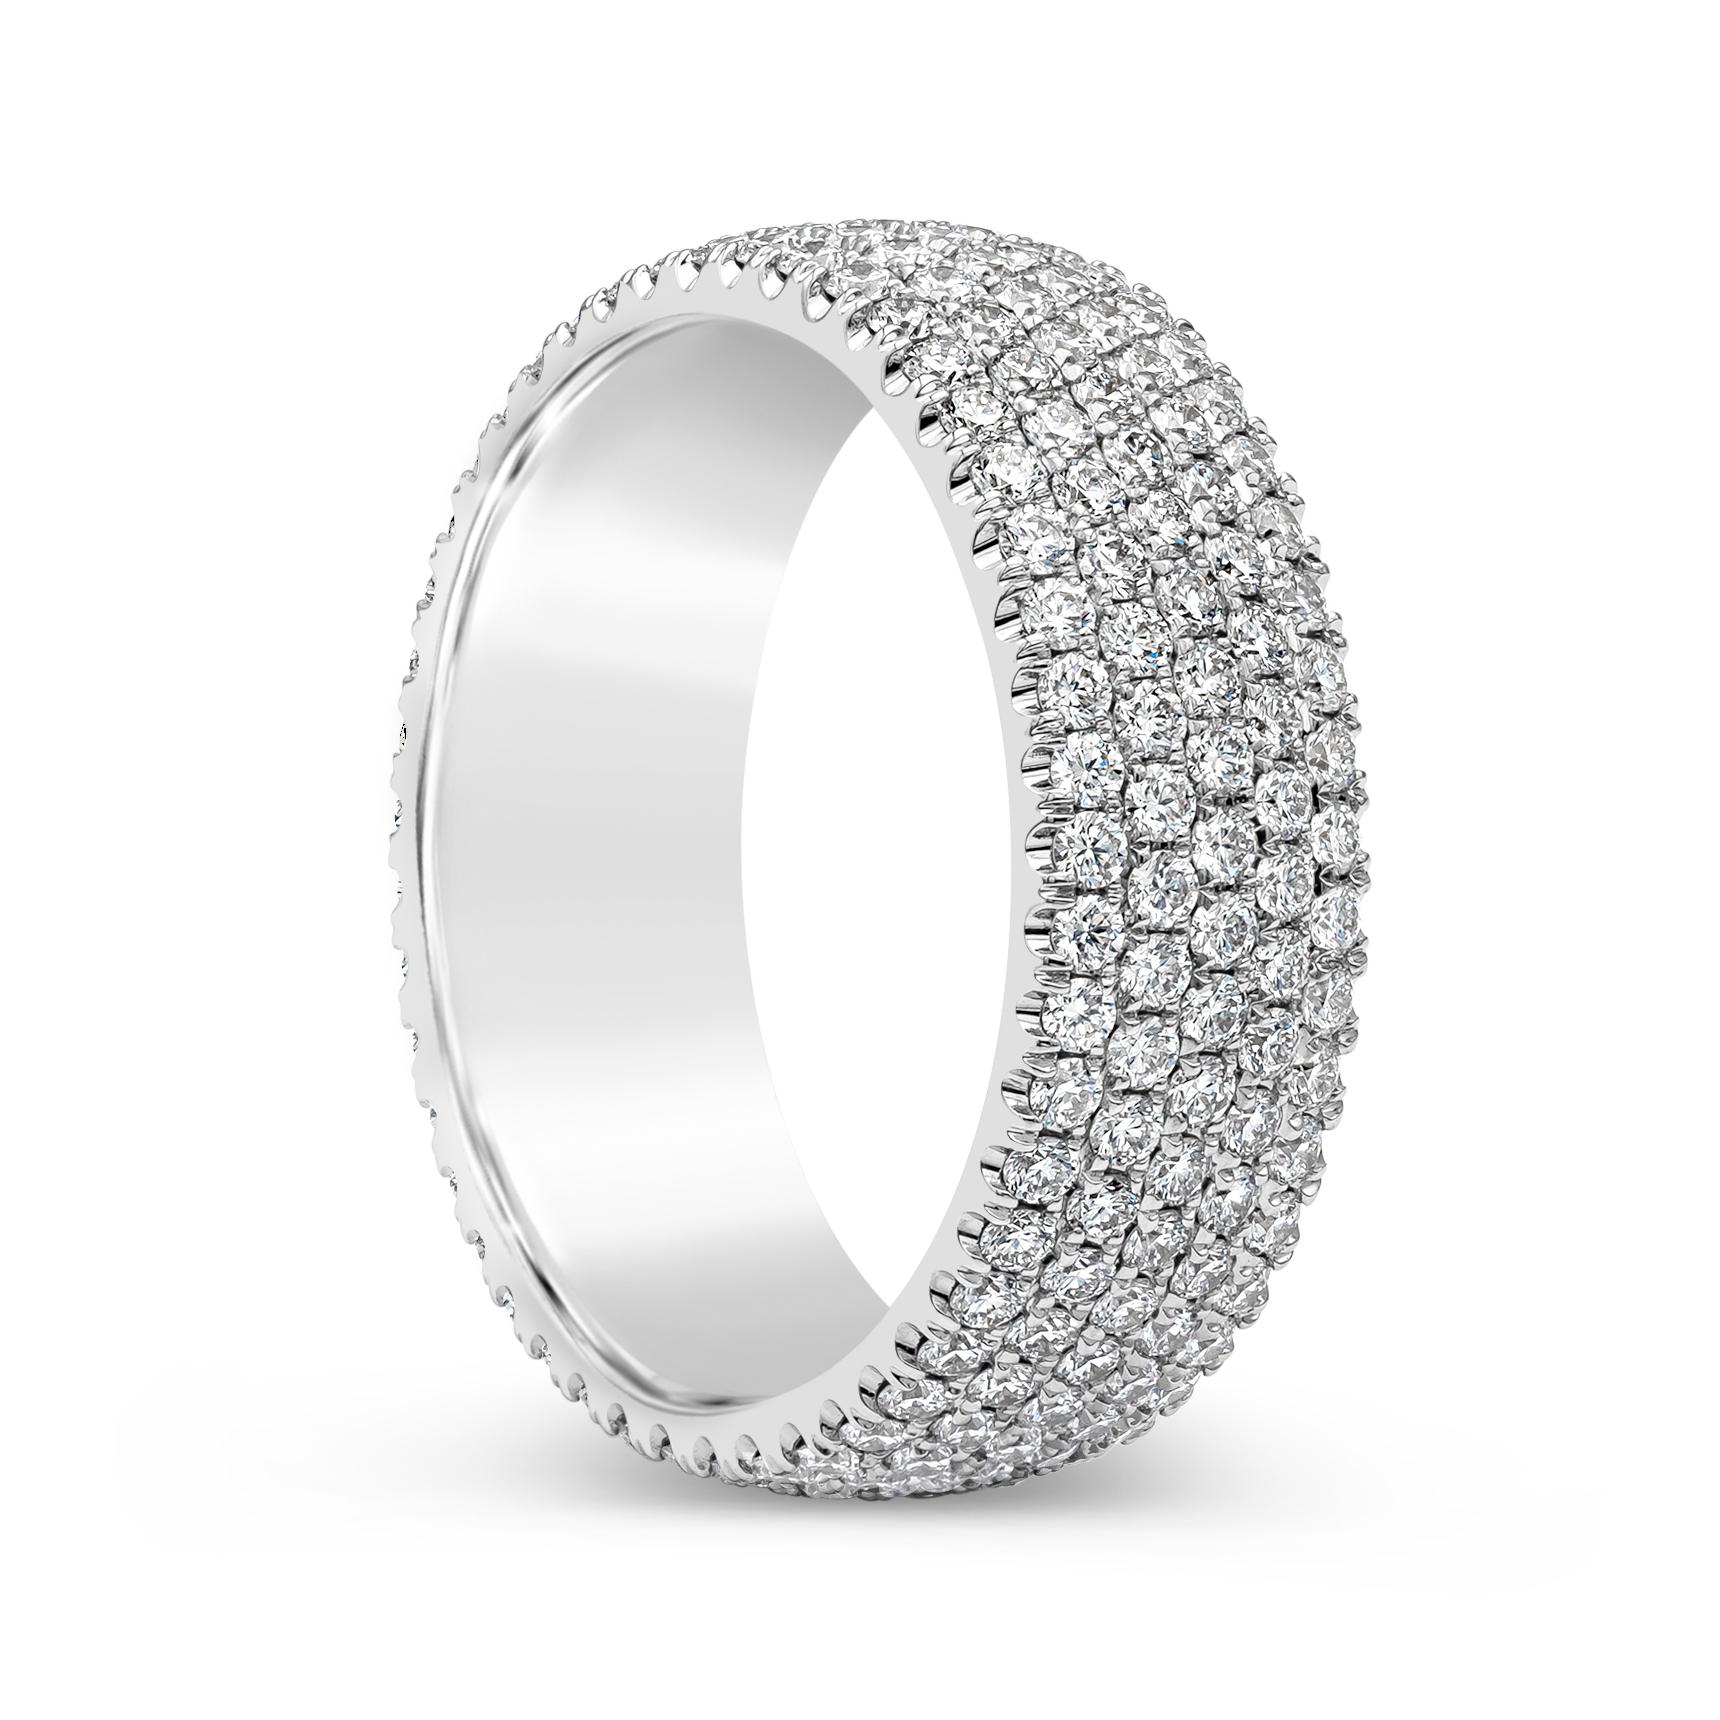 A brilliant piece of jewelry showcasing a cluster of round brilliant diamonds, micro-pave set in a wide 18k white gold mounting. Diamonds weigh 1.78 carats and are approximately F color, VS-SI clarity. Size 6 US.

Style available in different price